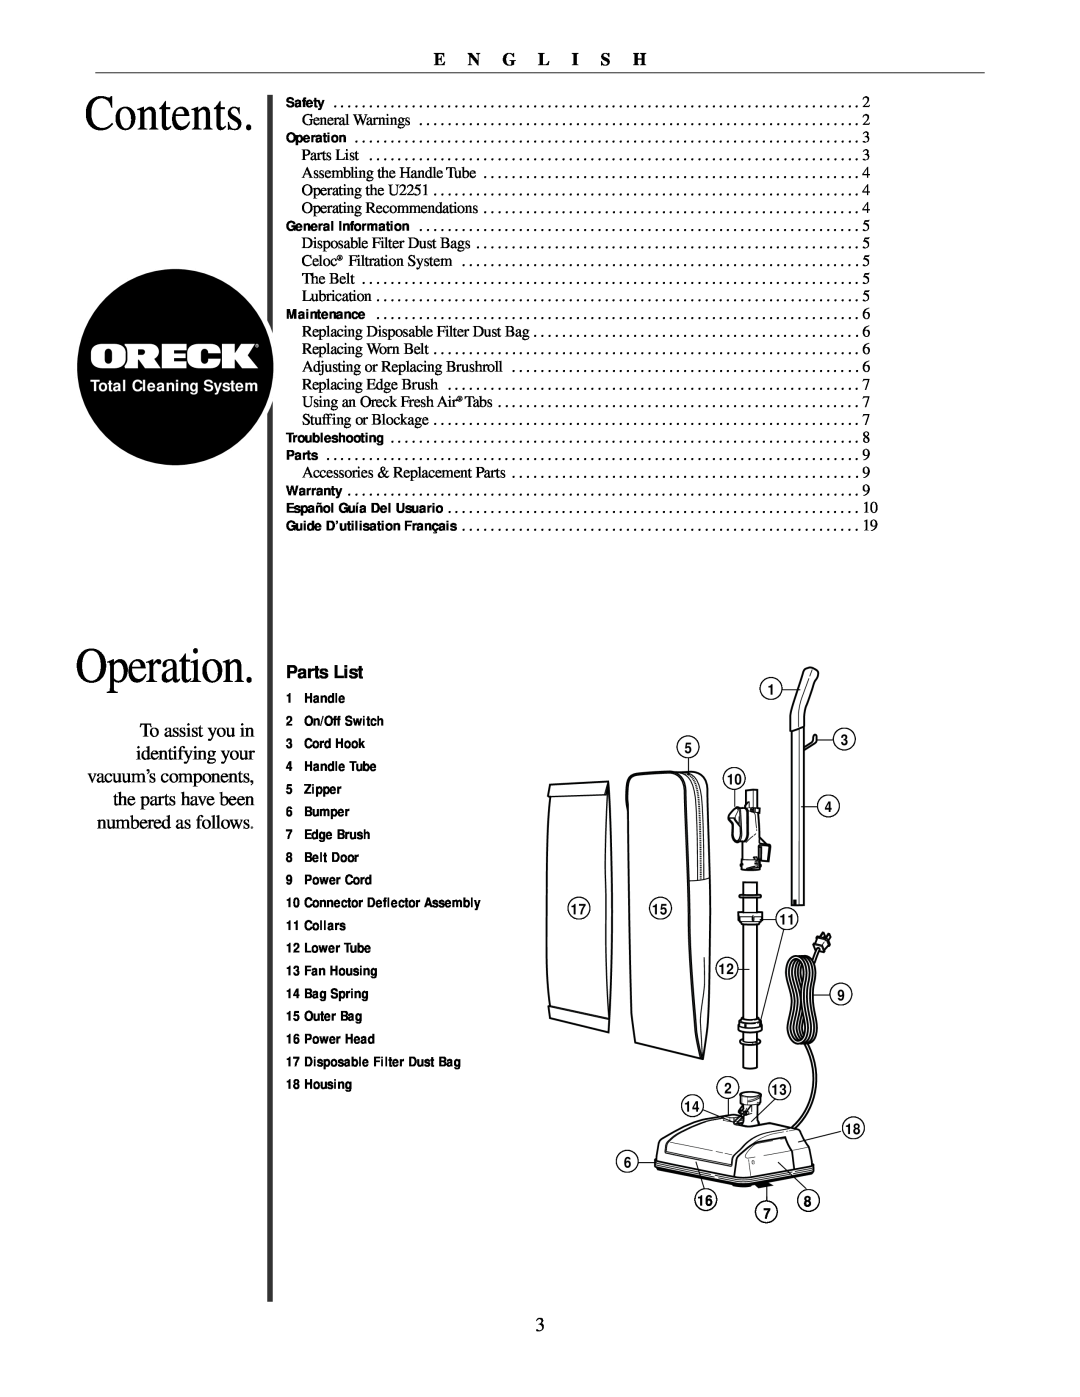 Oreck U2251 manual Contents, Operation, Parts List, E N G L I S H, Total Cleaning System 